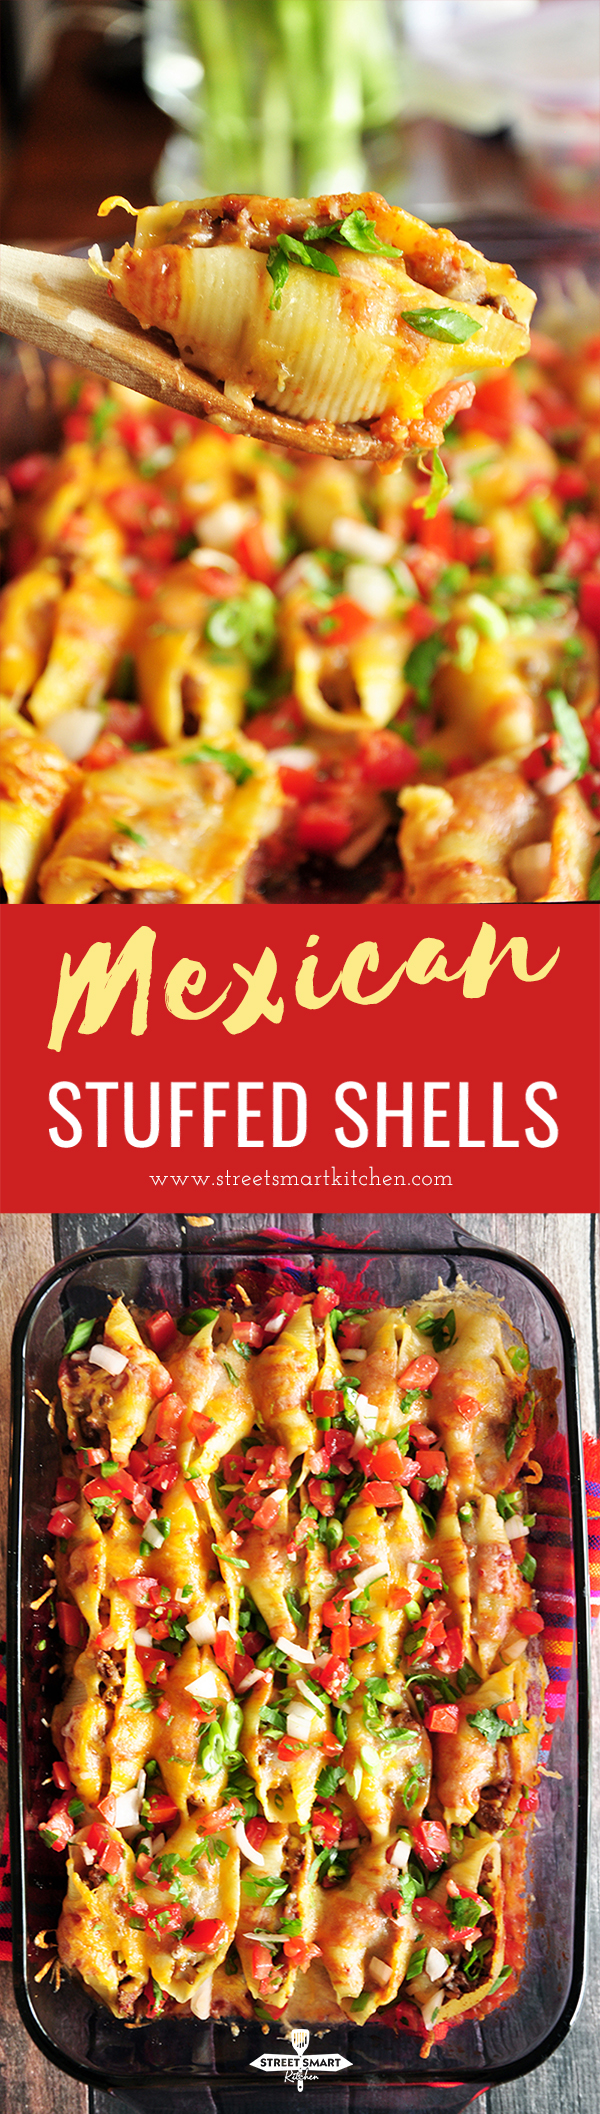 These Mexican stuffed shells are a fun twist on your traditional Mexican meal: full of spice, packed with flavor, and guaranteed to be a crowd pleaser.